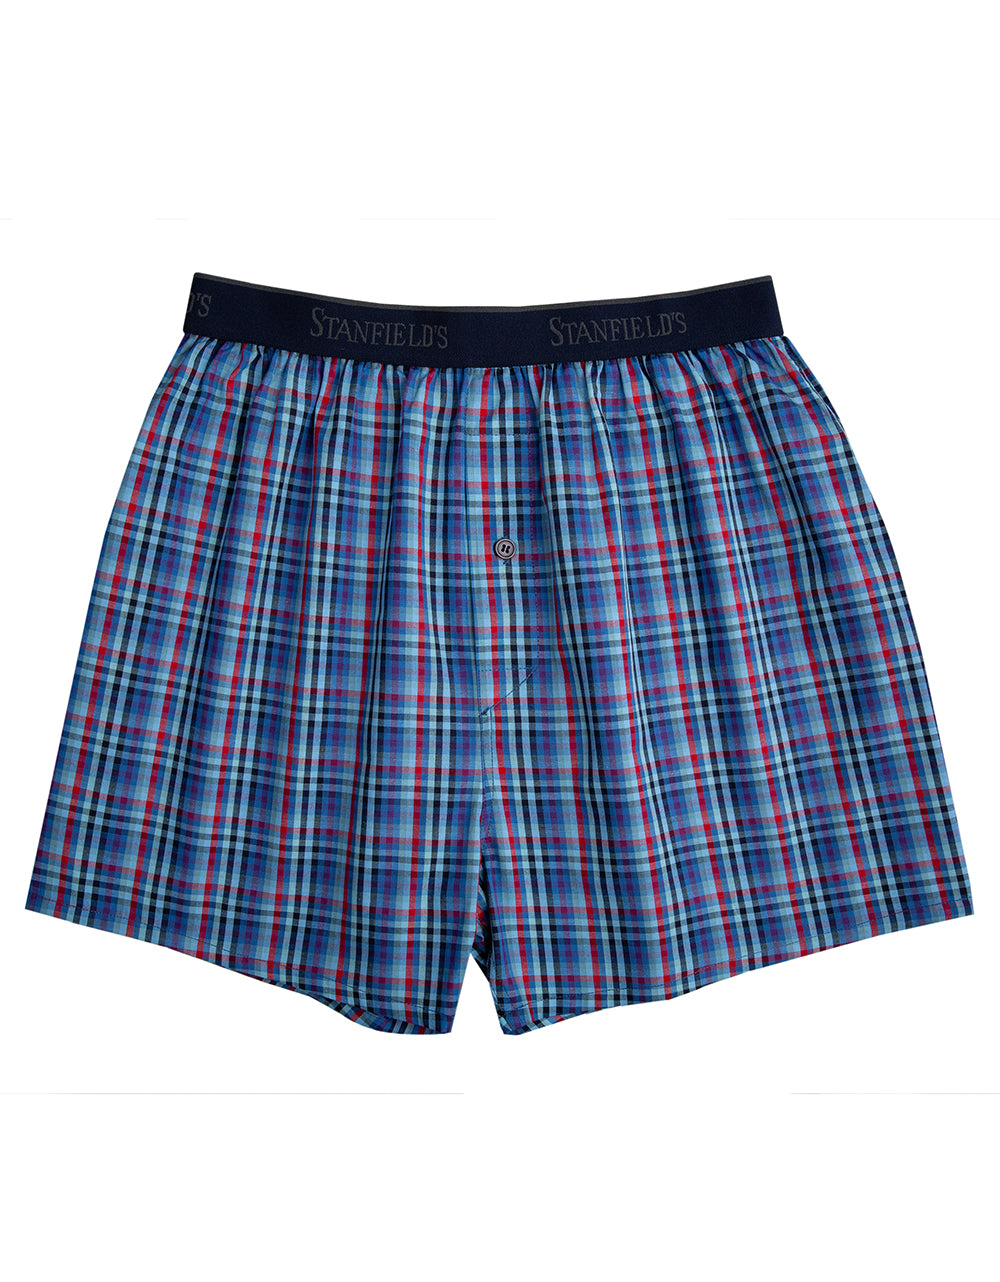 Boxers (Modern Fit Woven Cotton ) | Stanfields.com